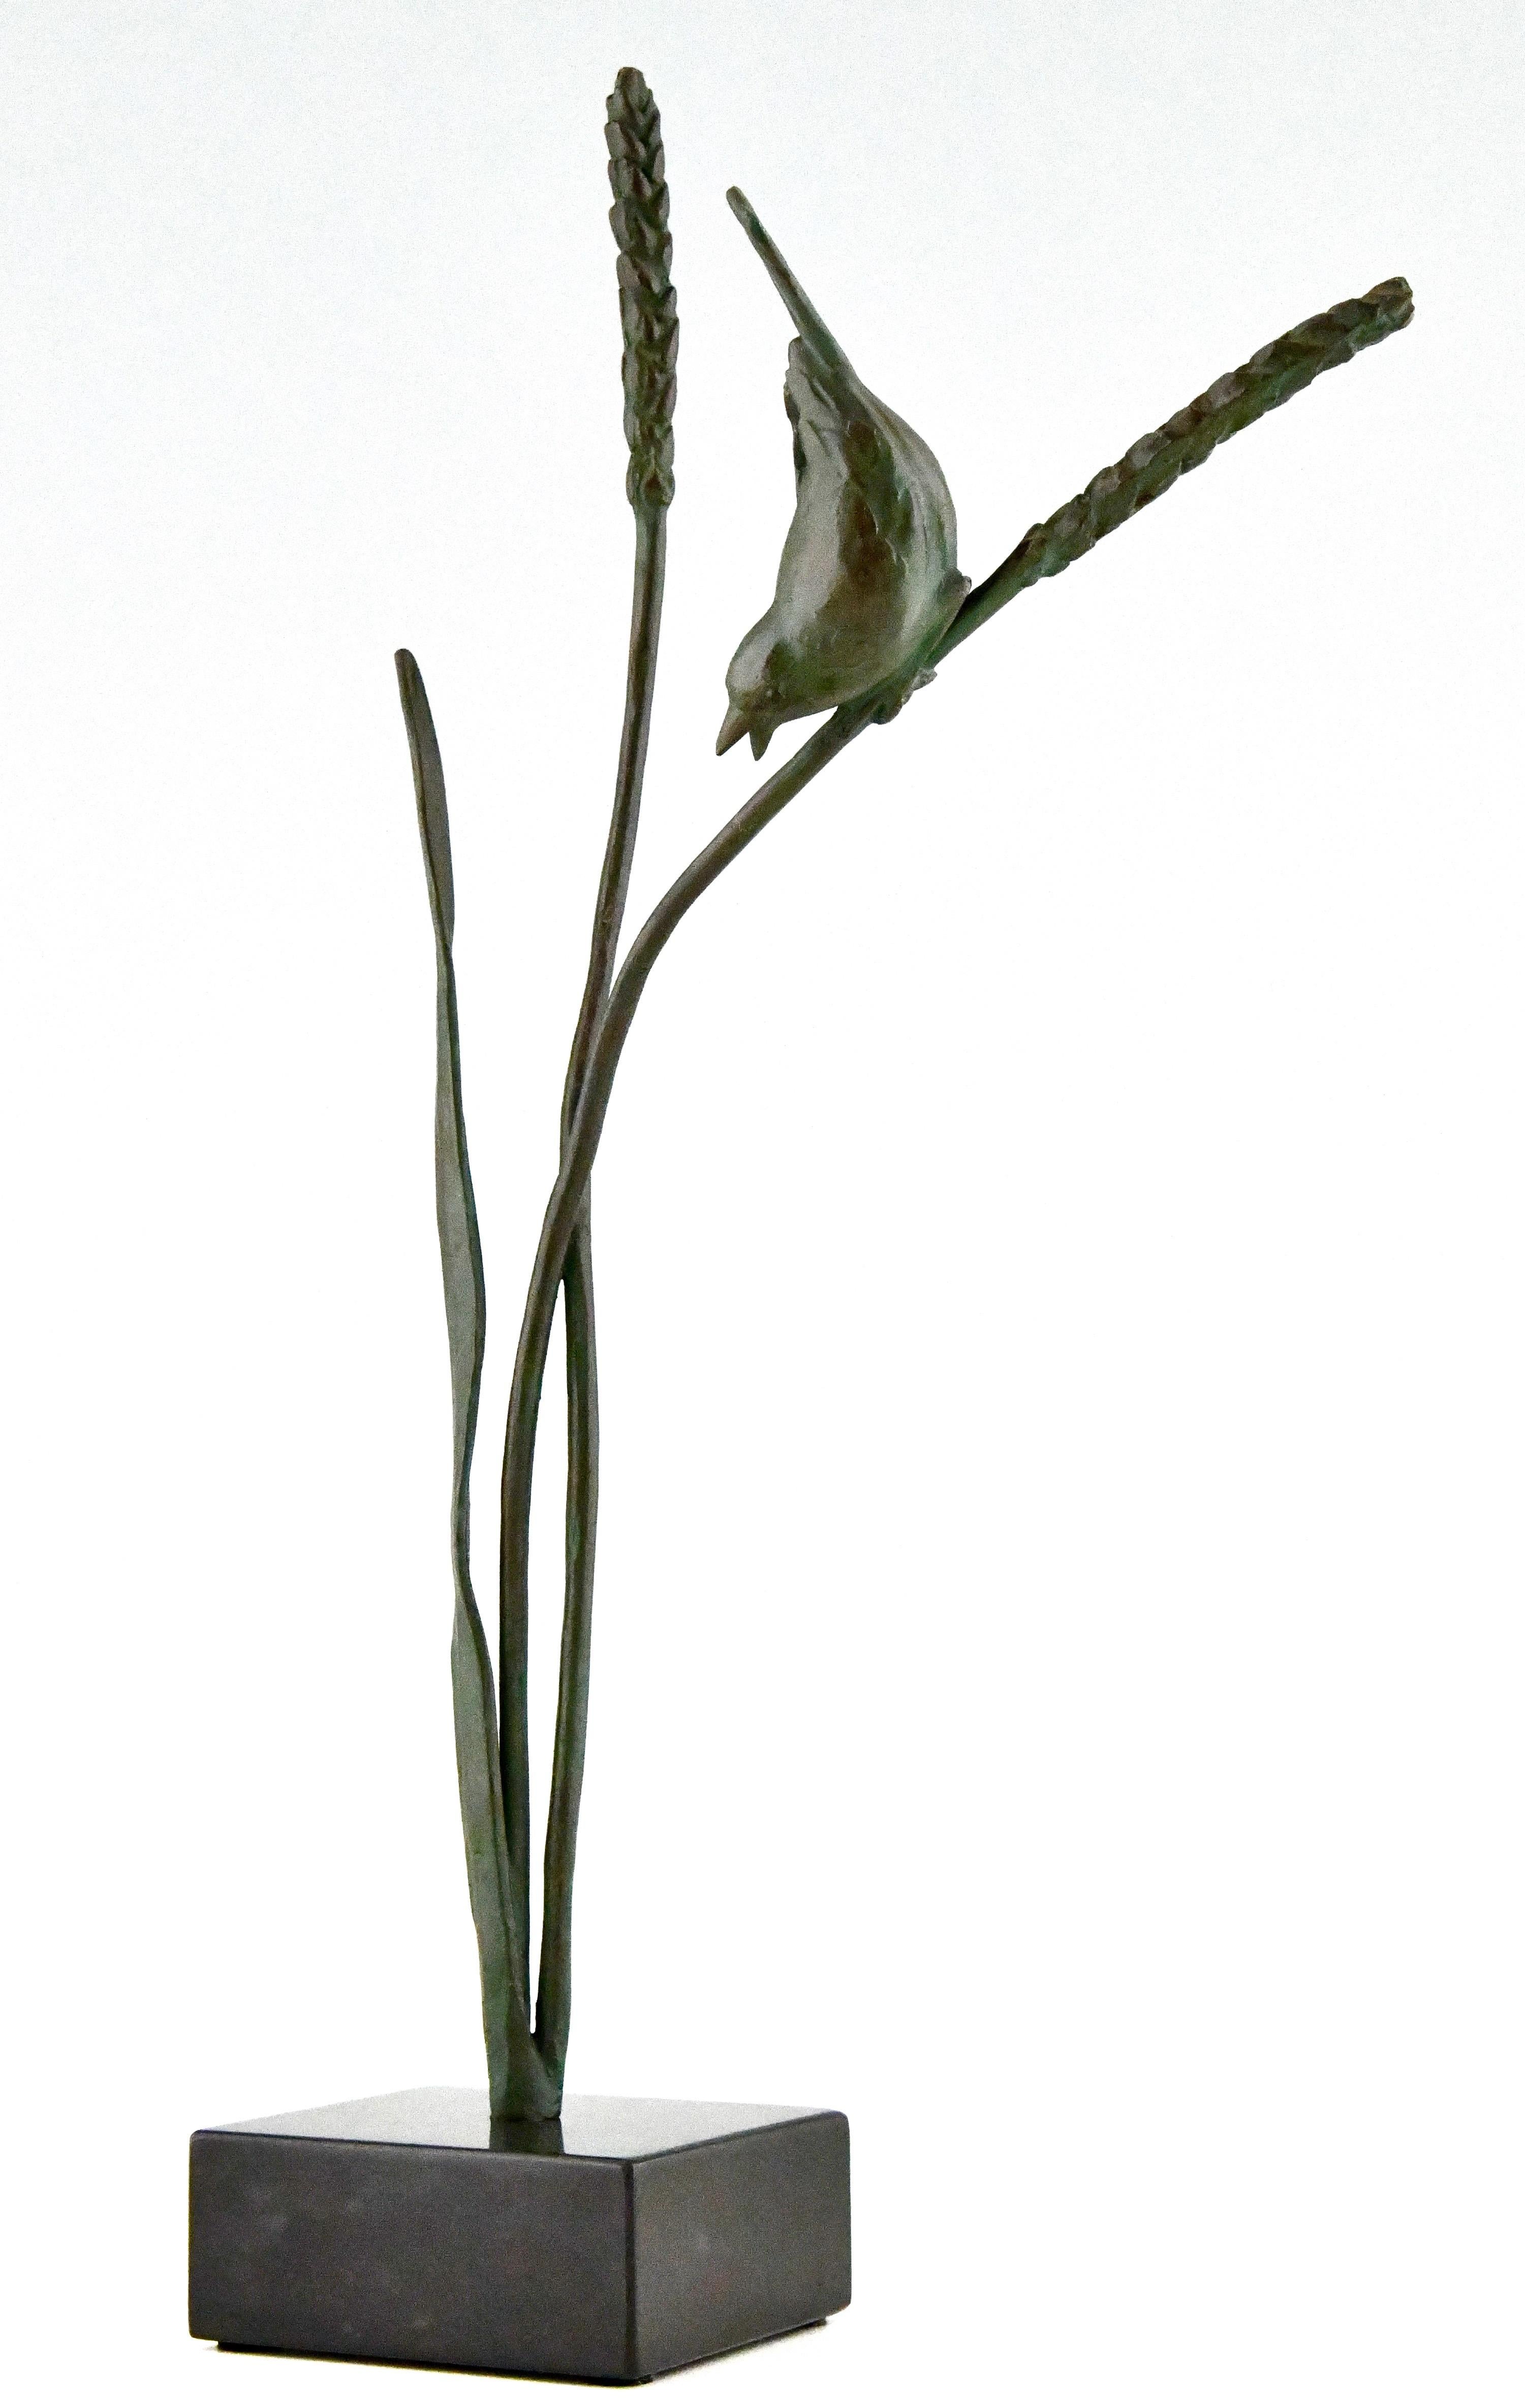 Art Deco bronze sculpture of a bird on a wheat stalk signed by the French artist Chatill.
France 1930. 
Marked bronze.
The sculpture has a green patina and is mounted on a Belgian Black marble base.